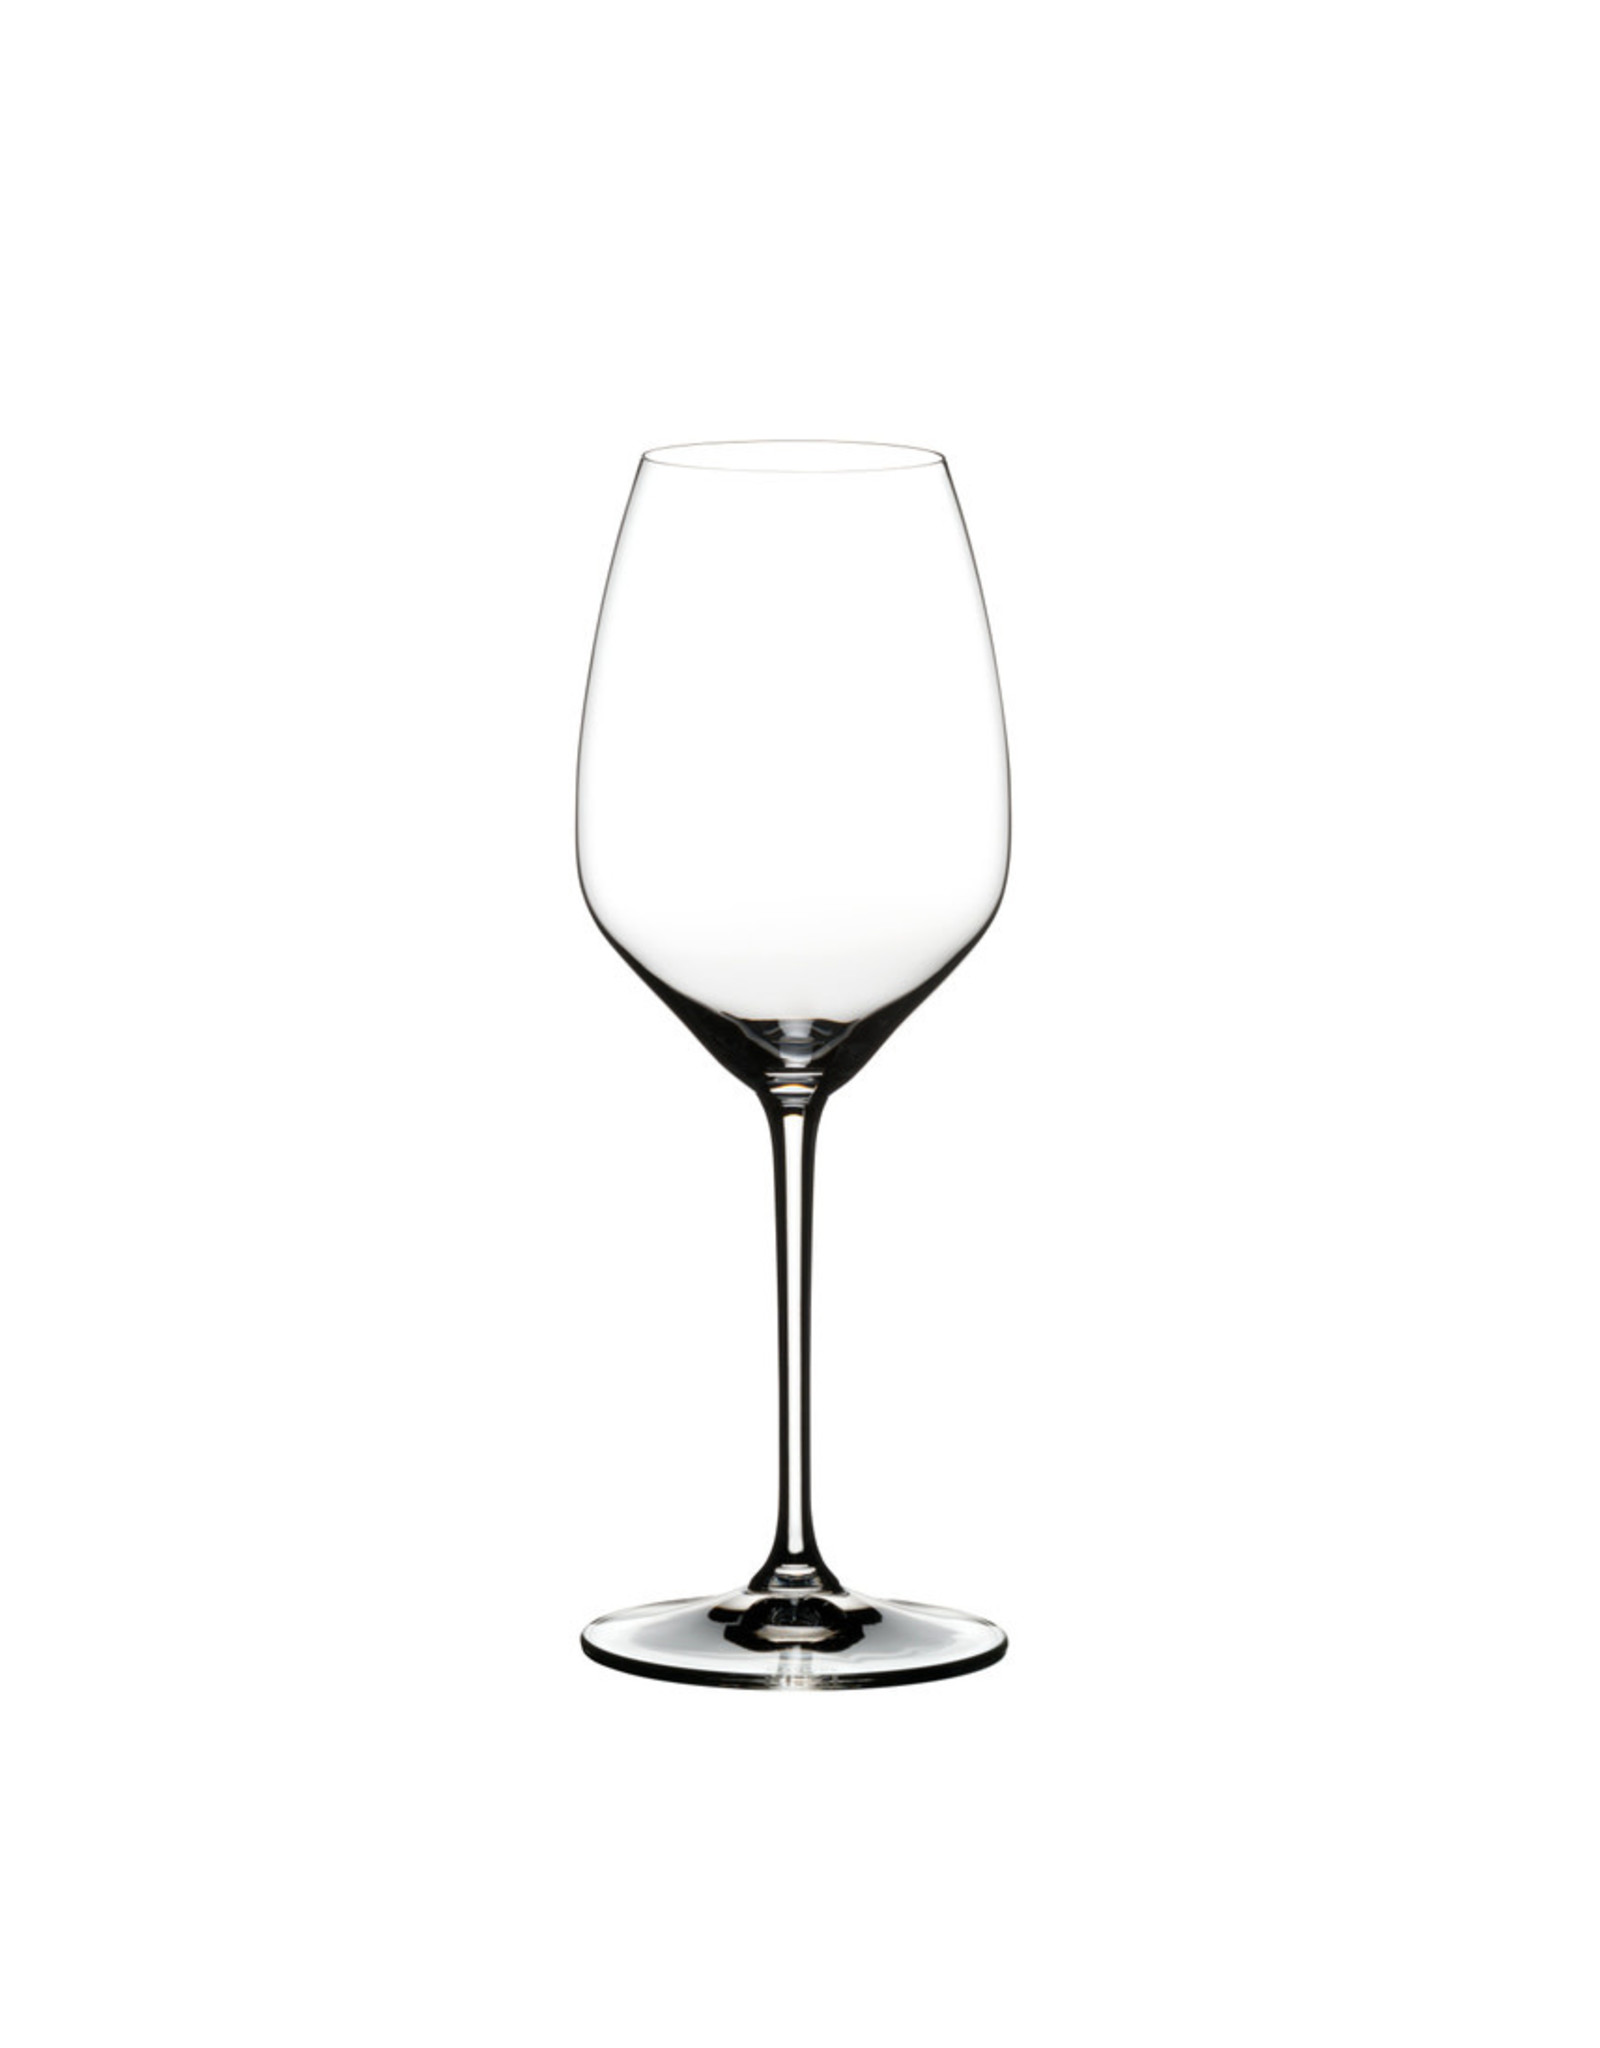 Riedel Riedel Extreme Riesling / Sauvignon Blanc Glass